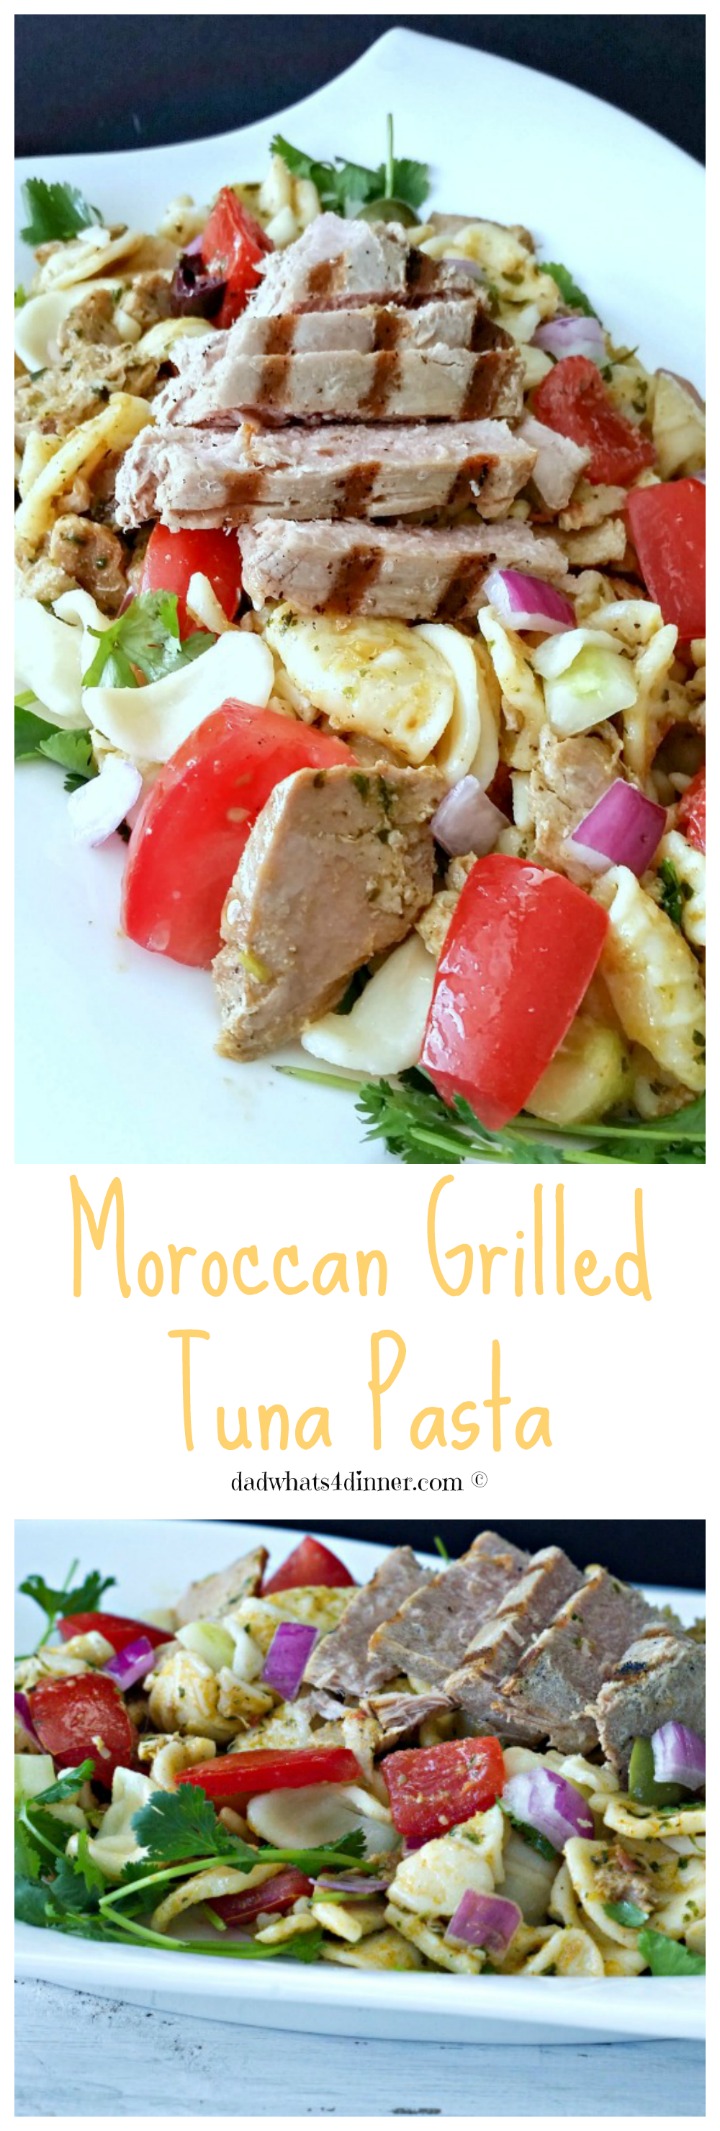 My Moroccan Grilled Tuna Pasta, loaded bold flavors, is a wonderful fresh dinner idea for spring and summer.